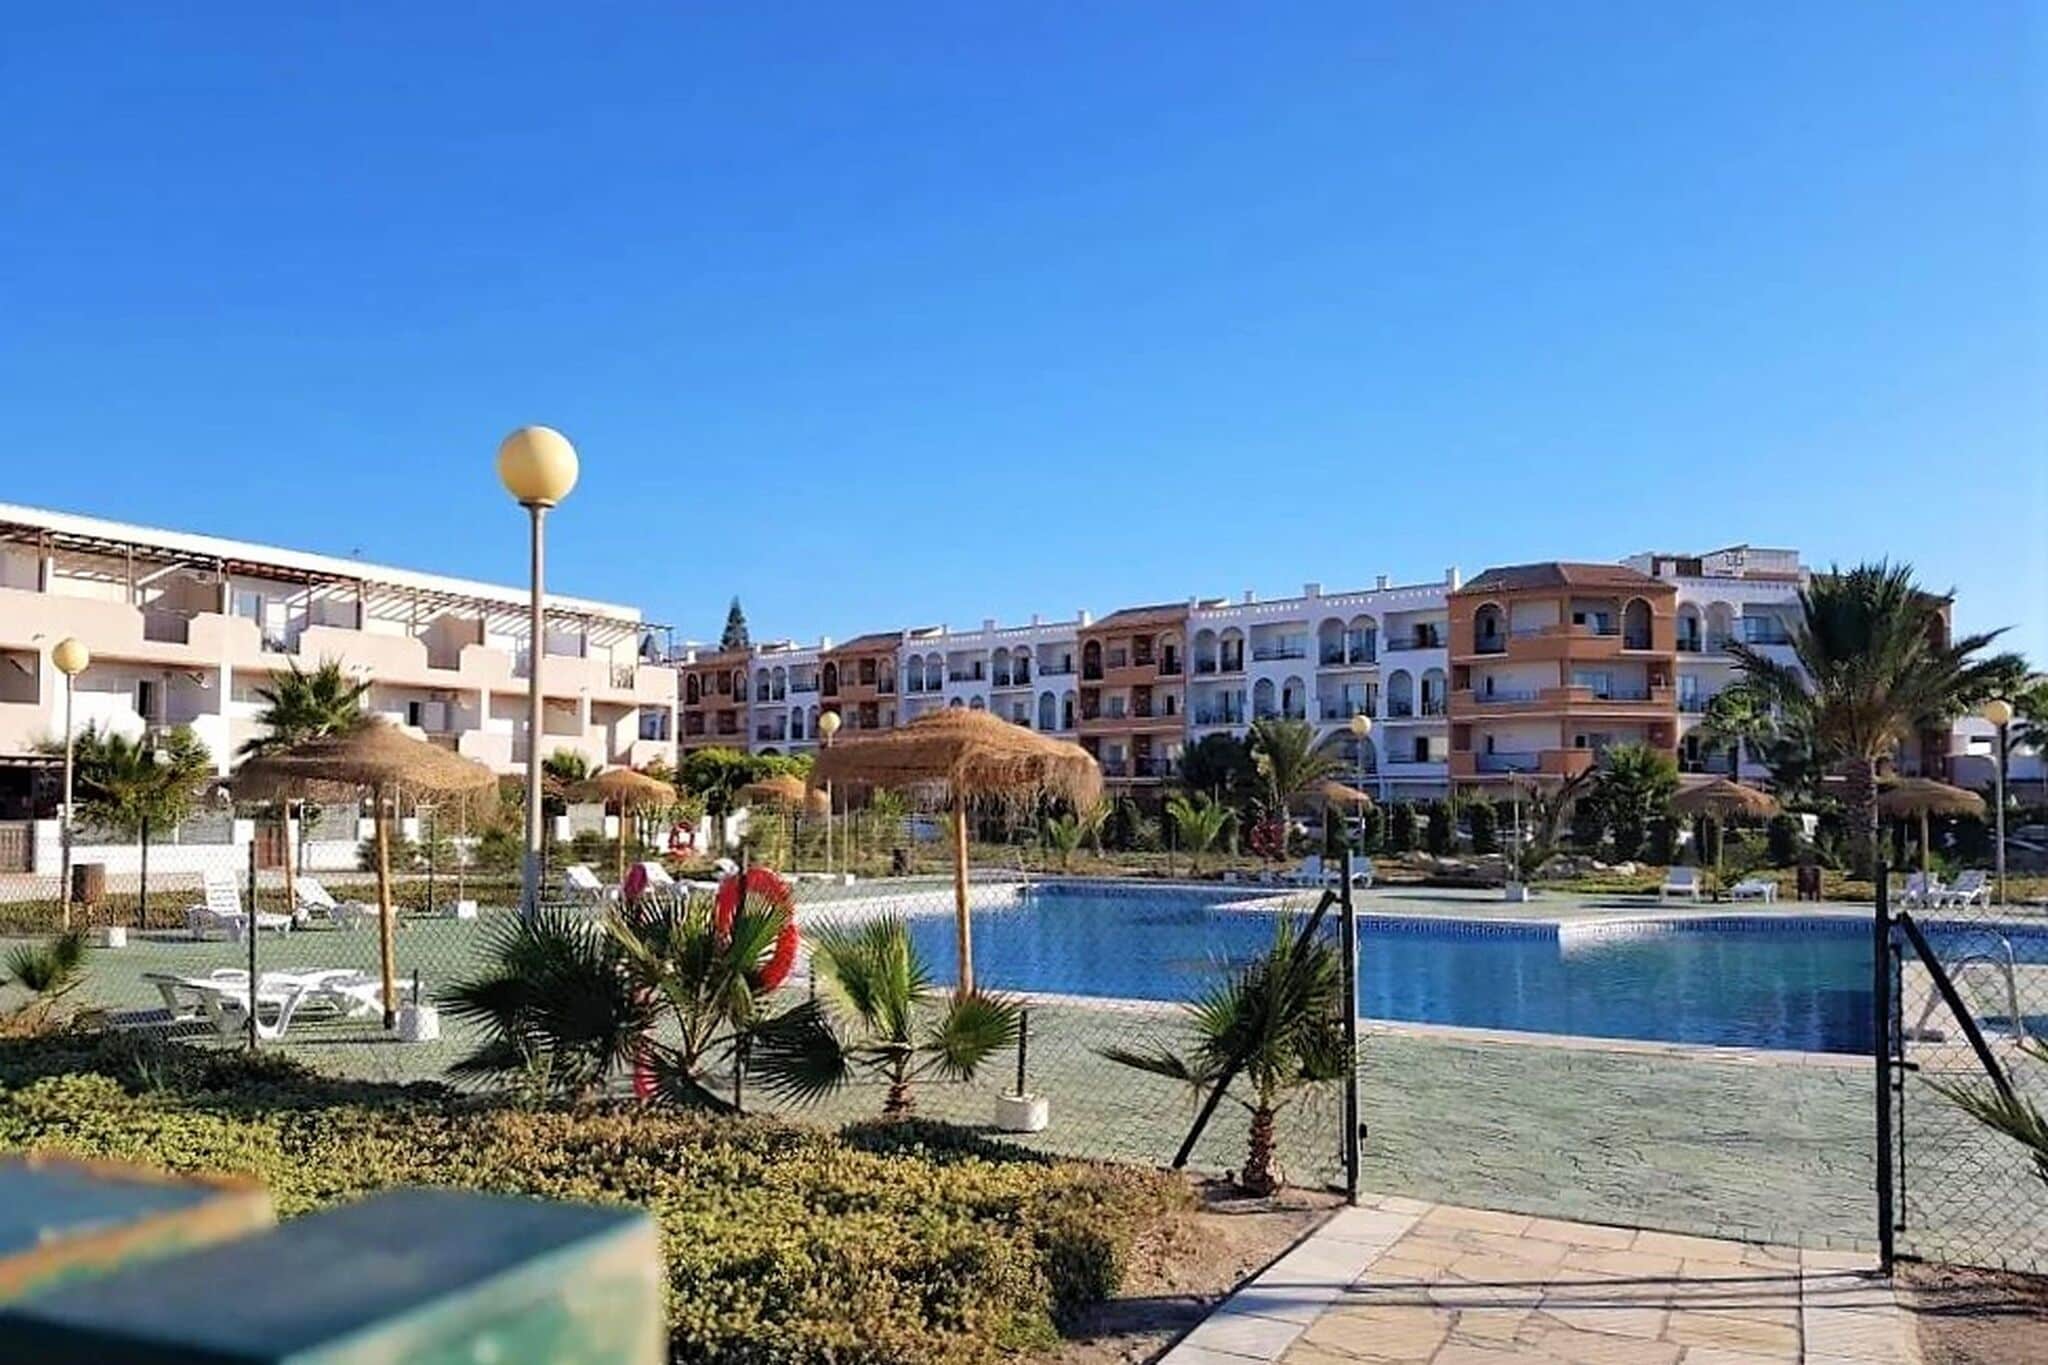 Duplex in Urb Naturista, with patio, swimming pools and access to naturist beach